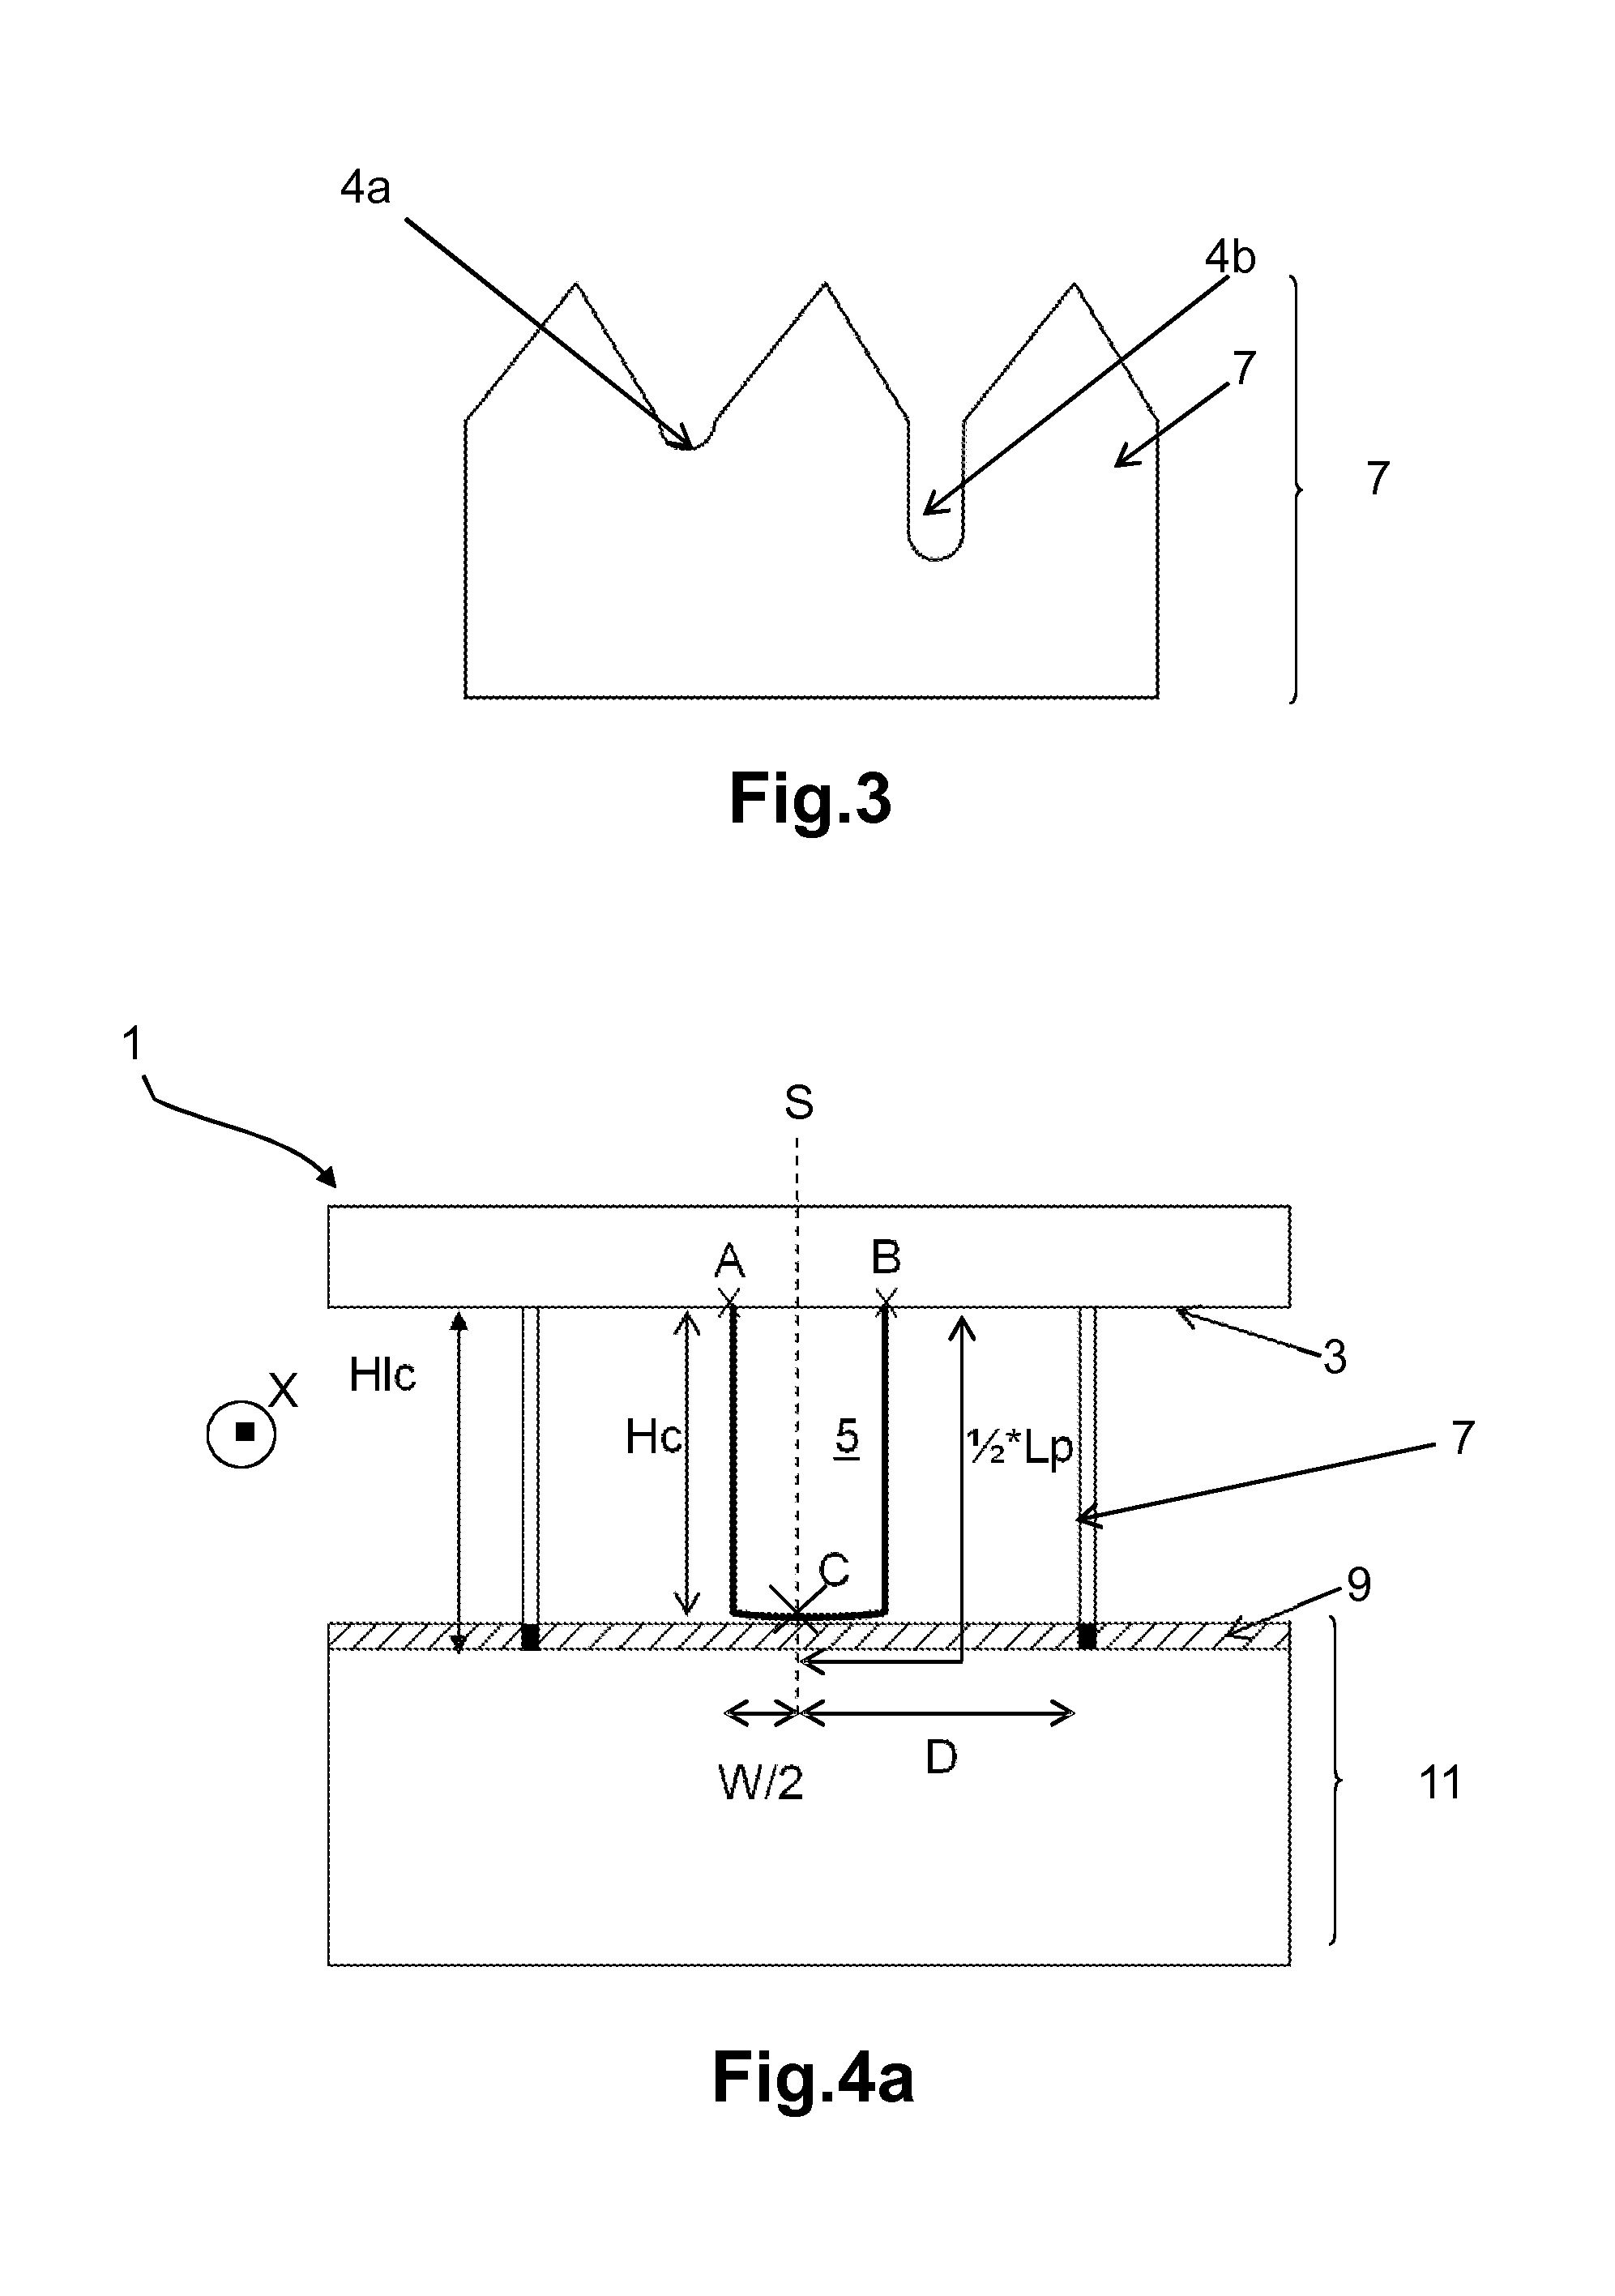 Molding element comprising cutting means for molding and vulcanizing a tire tread